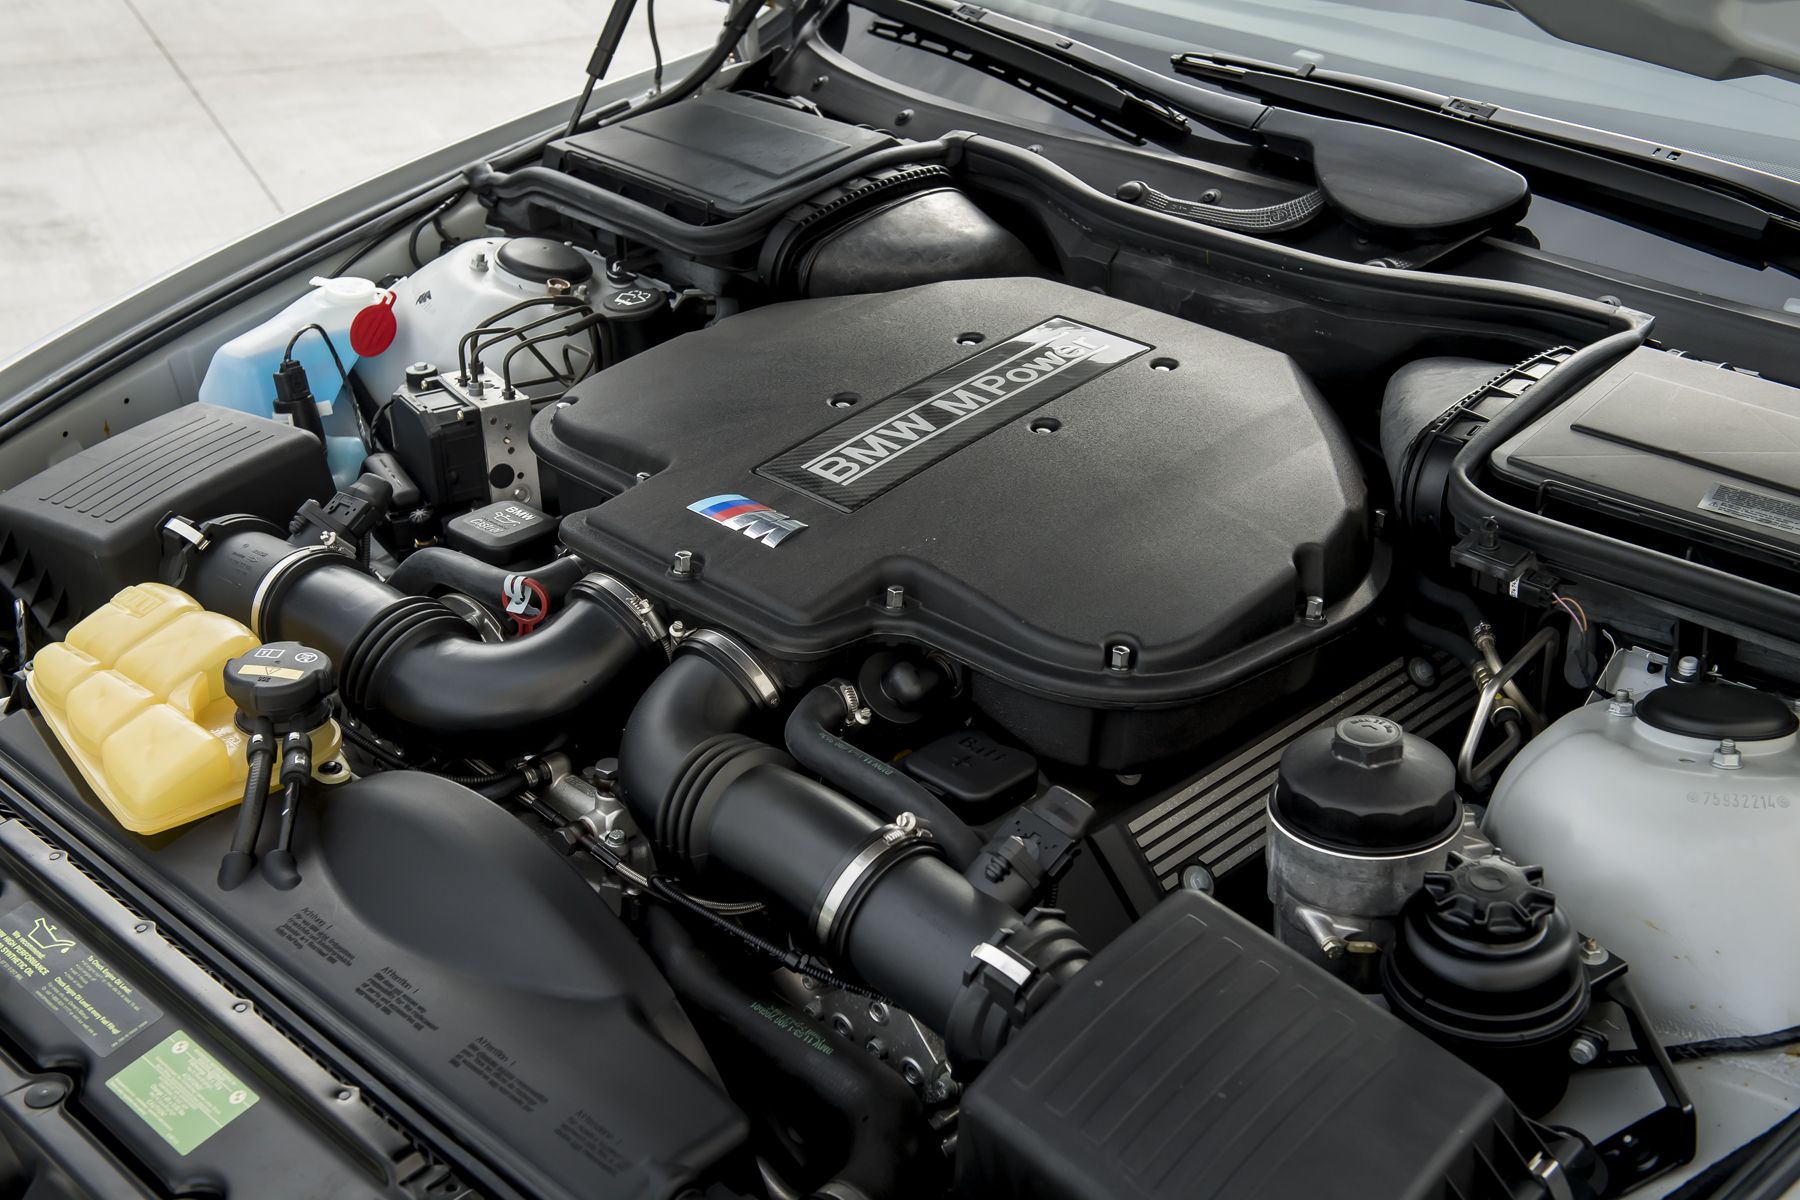 VIDEO: Carwow shows why the E60 BMW M5 has the best M engine